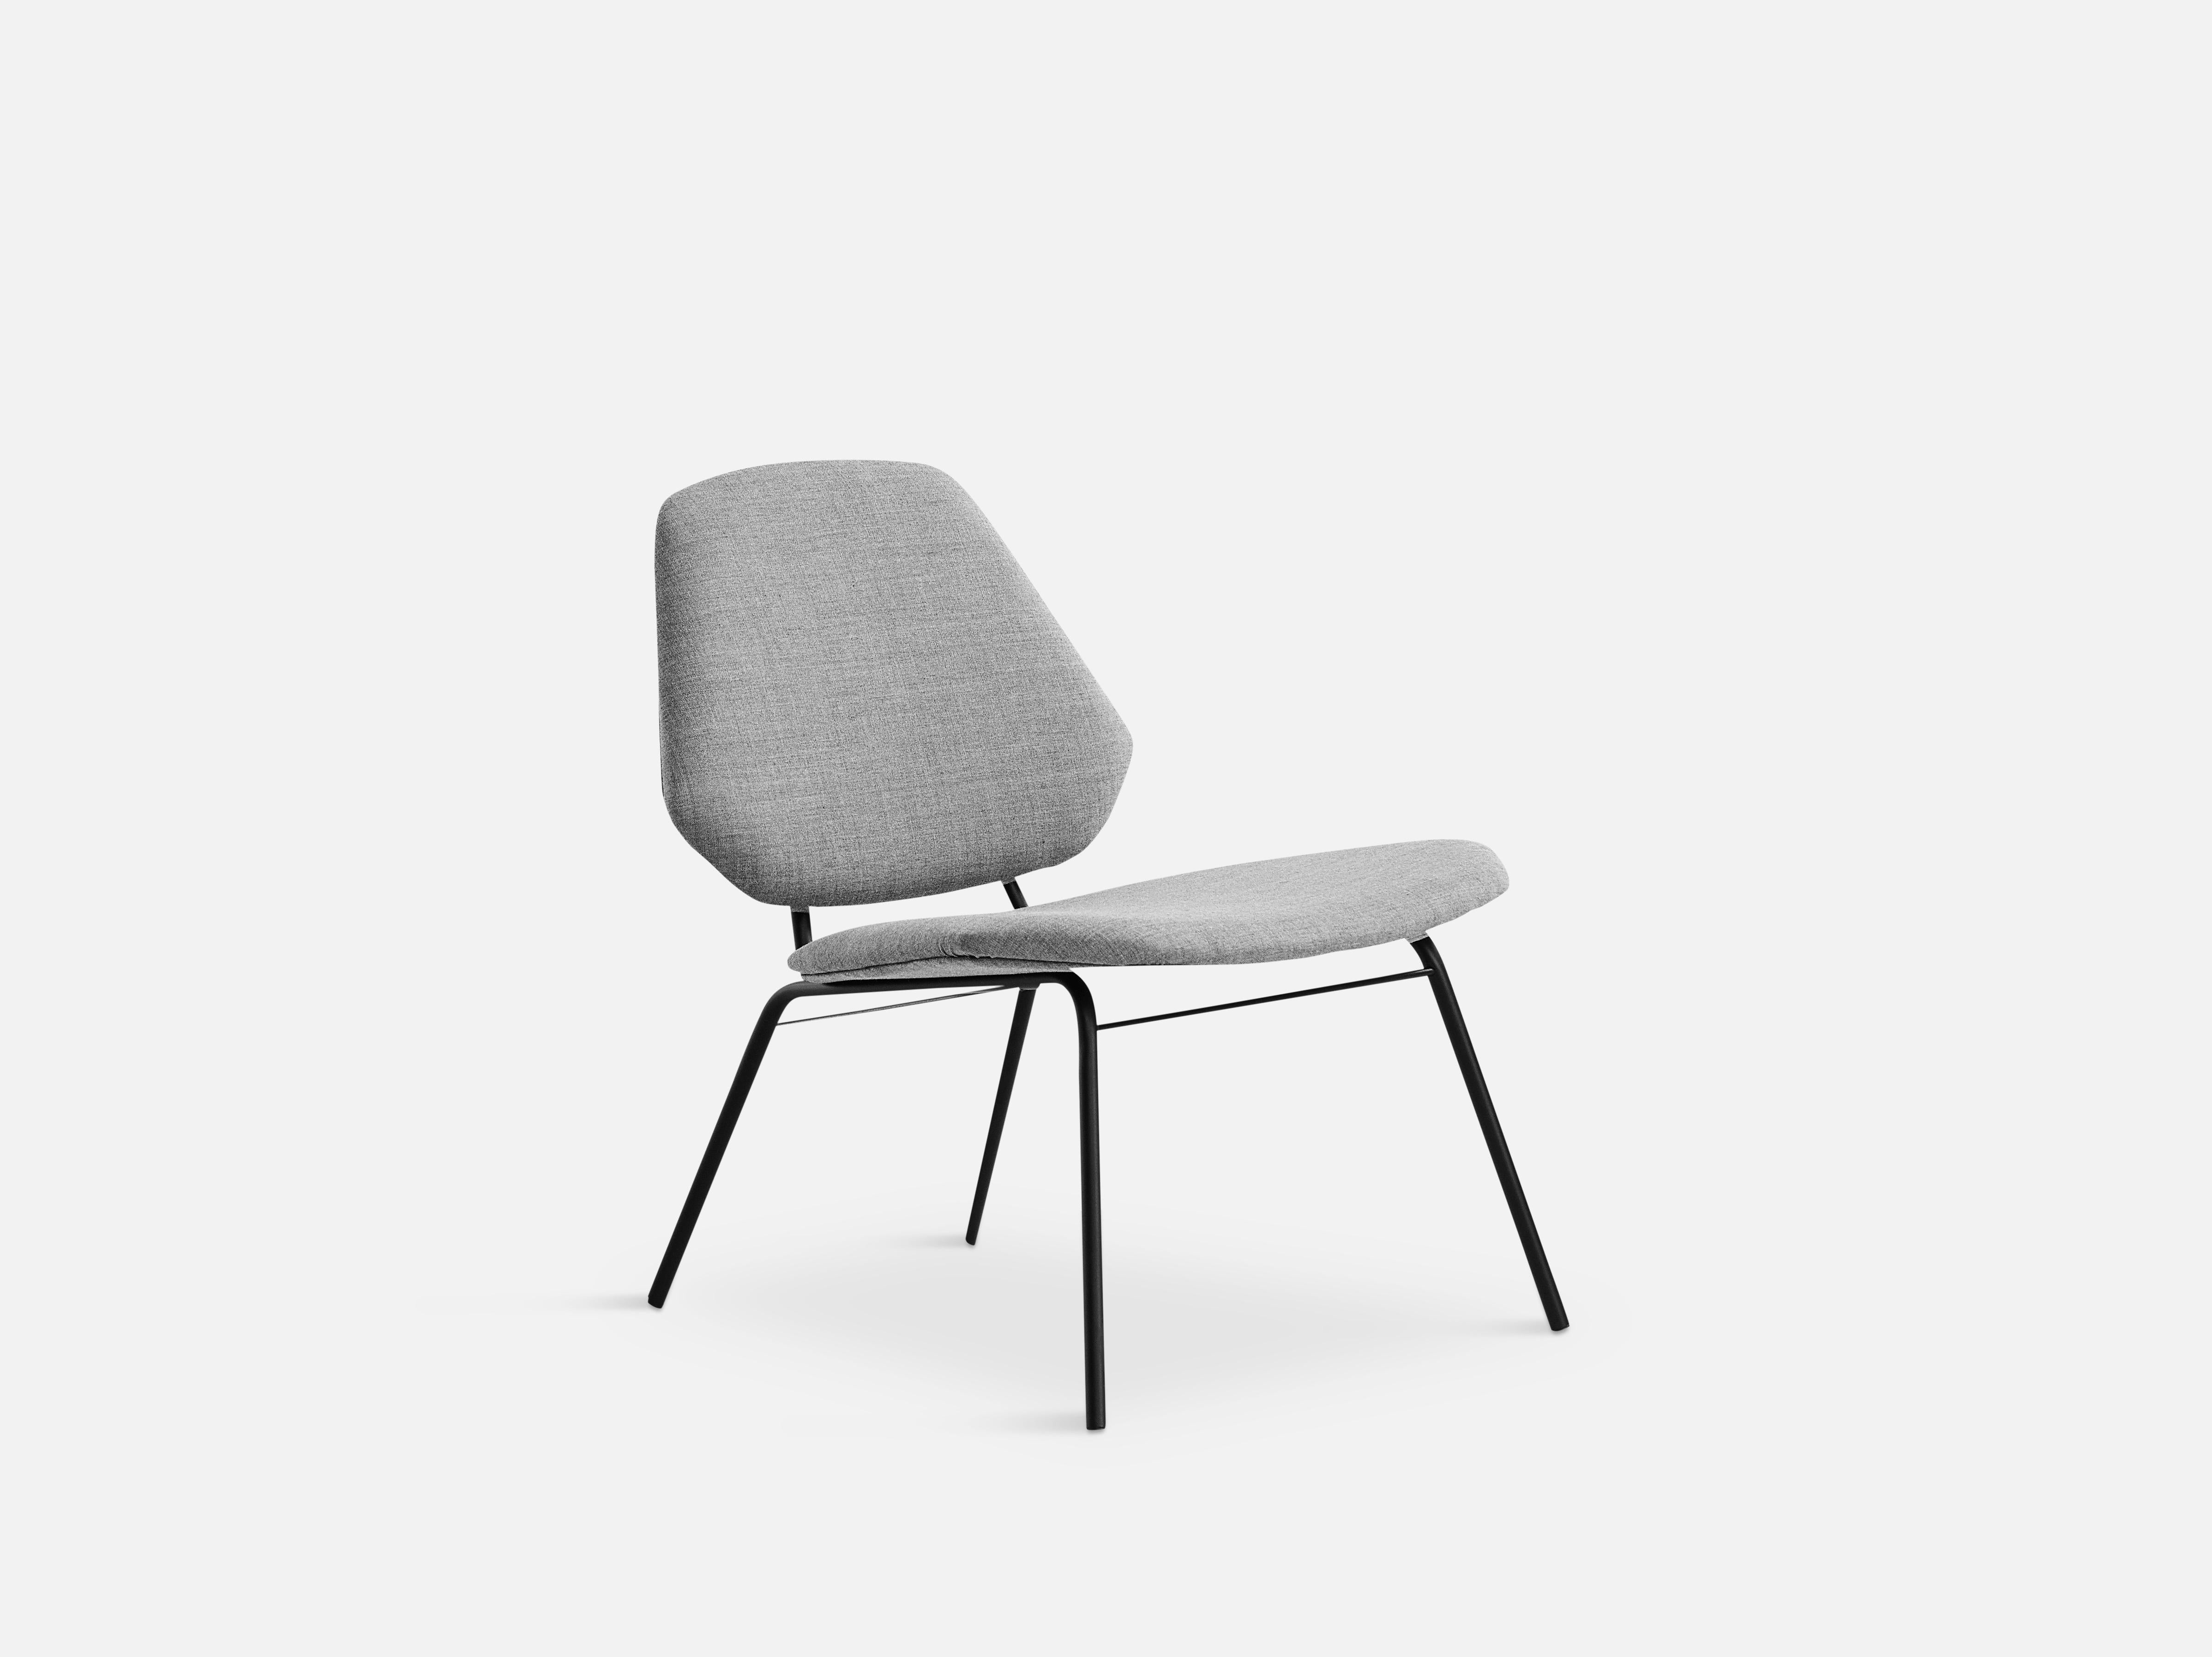 Lean stone grey lounge chair by Nur Design
Materials: Plywood, fibre and foam
Dimensions: D 66 x W 64 x H 72 cm
Also available in different colors.

The founders, Mia and Torben Koed, decided to put their 30 years of experience into a new